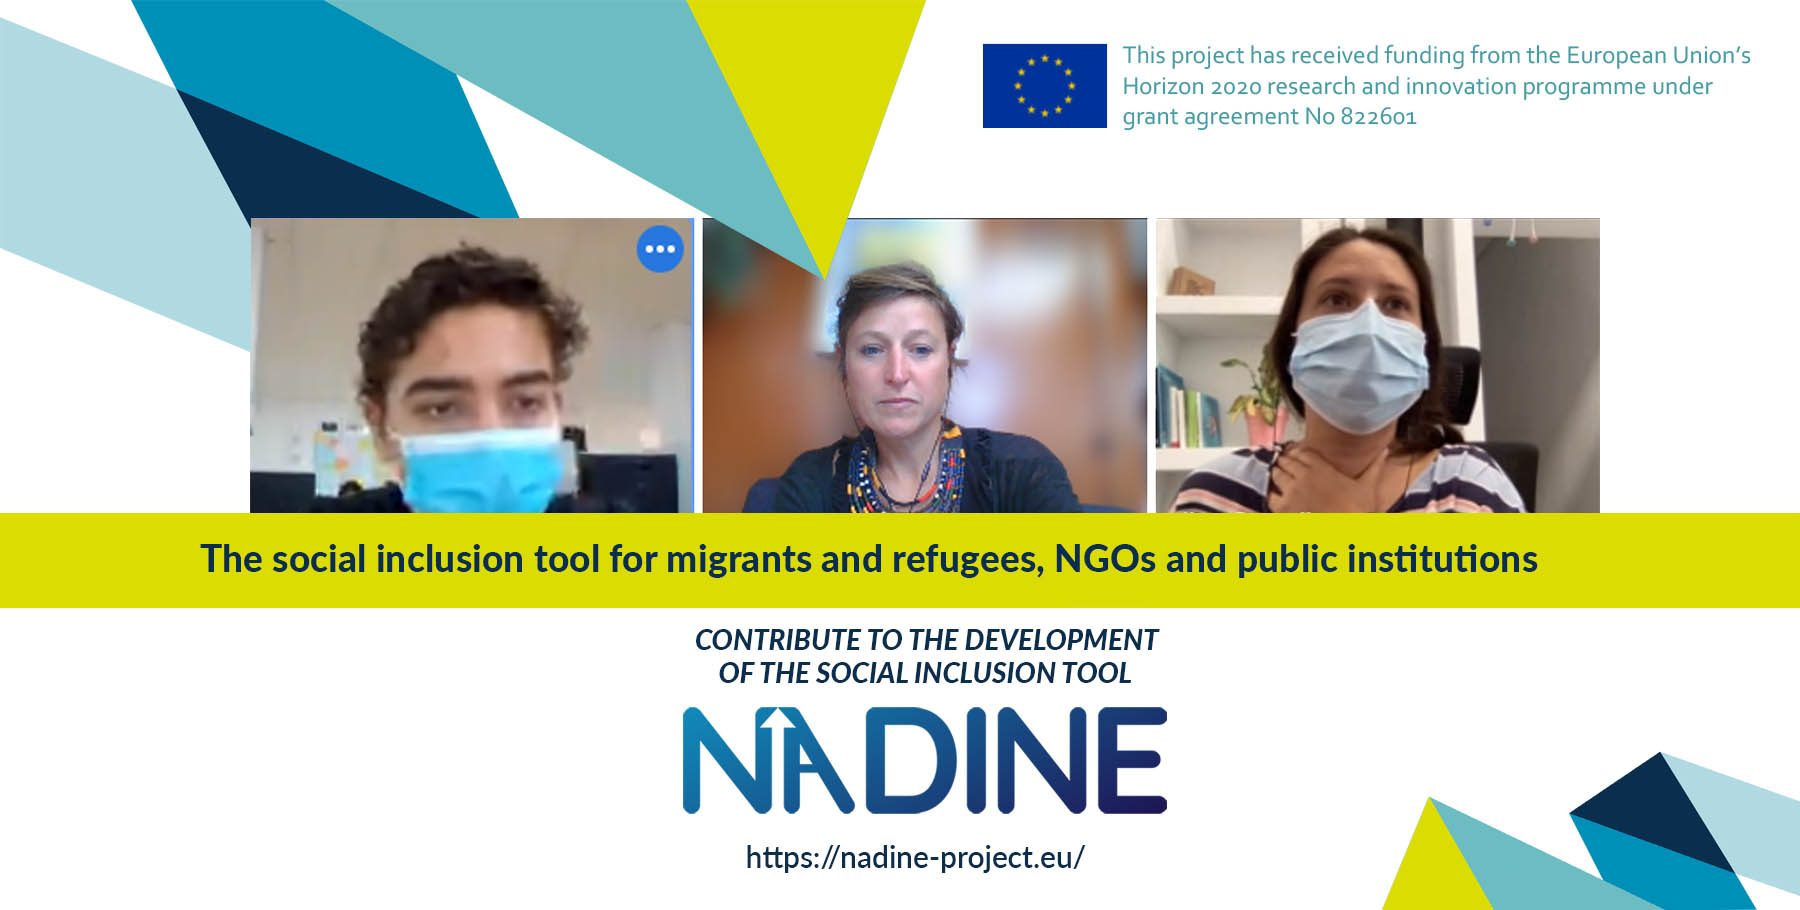 NADINE pilot phase completed: employment and training for the integration of migrants, refugees and asylum seekers